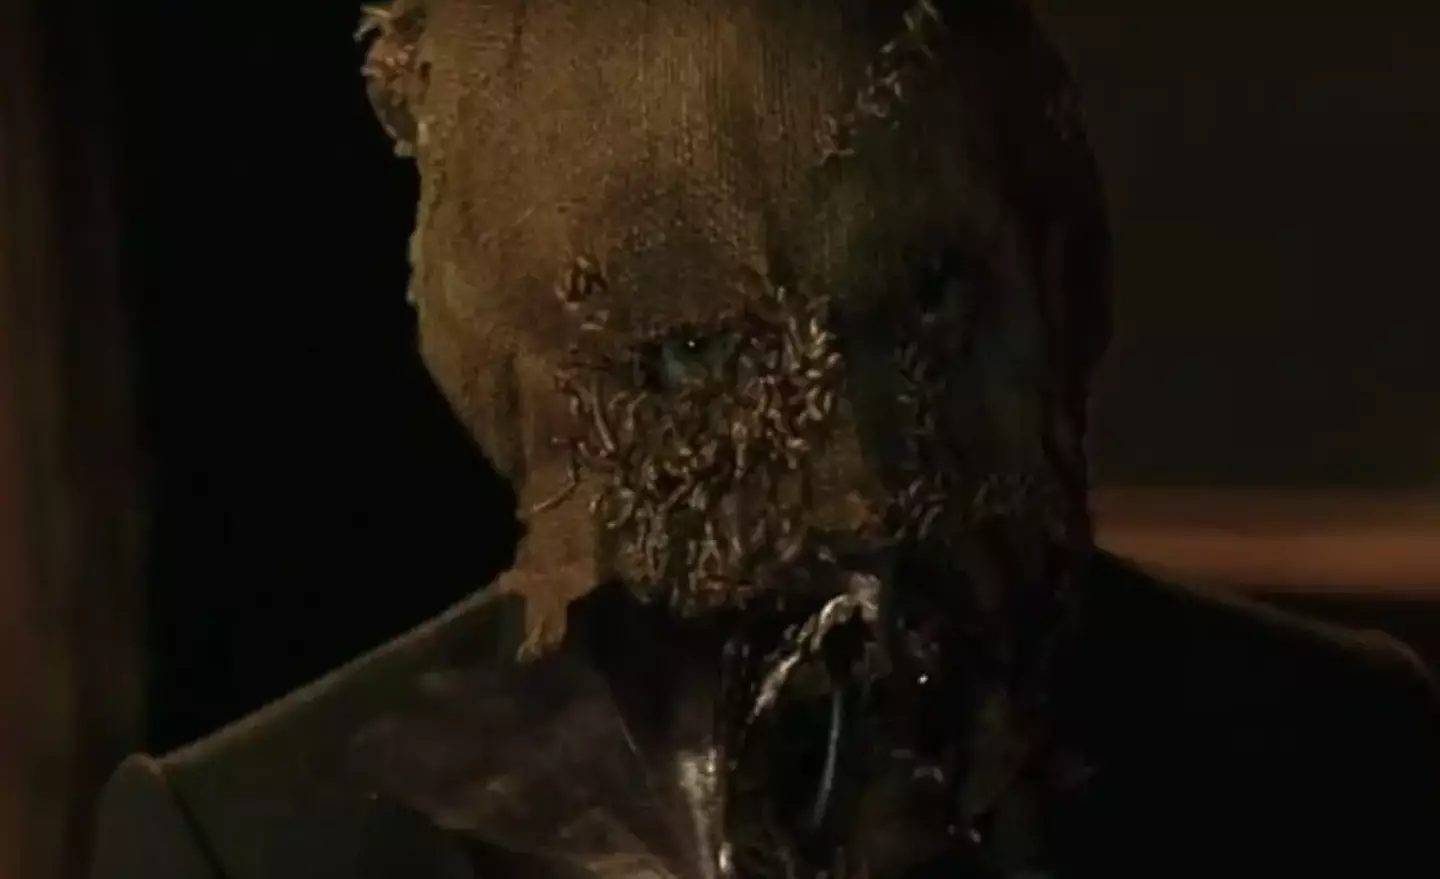 The Irish actor would go on to play the terrifying Scarecrow in the 2005 film.